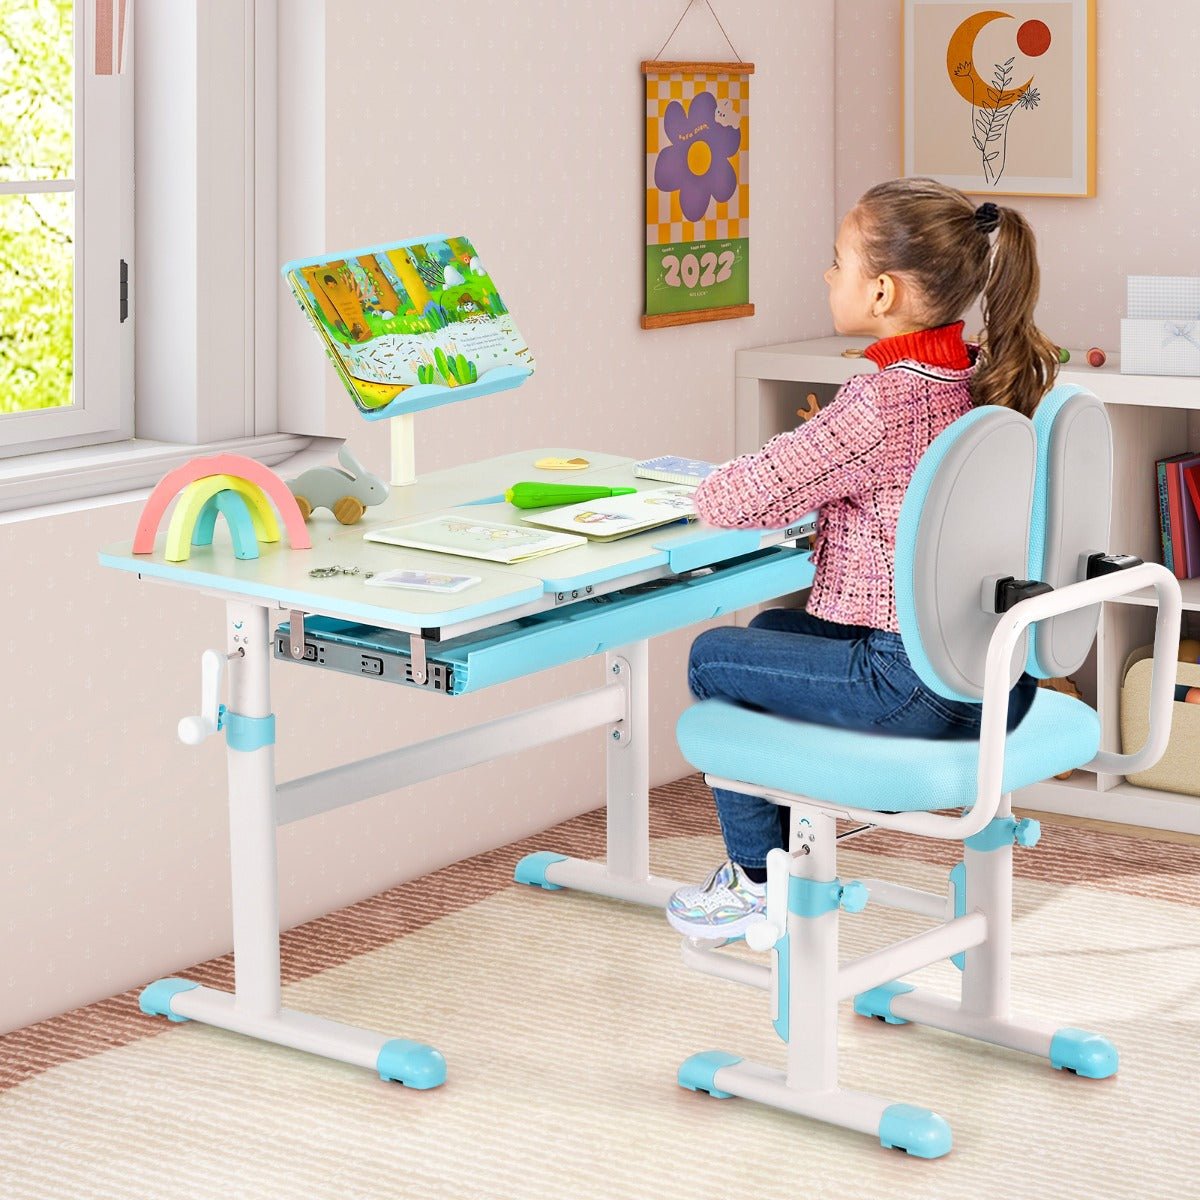 Enhance Study Time with the Blue Kid's Study Desk & Chair Set